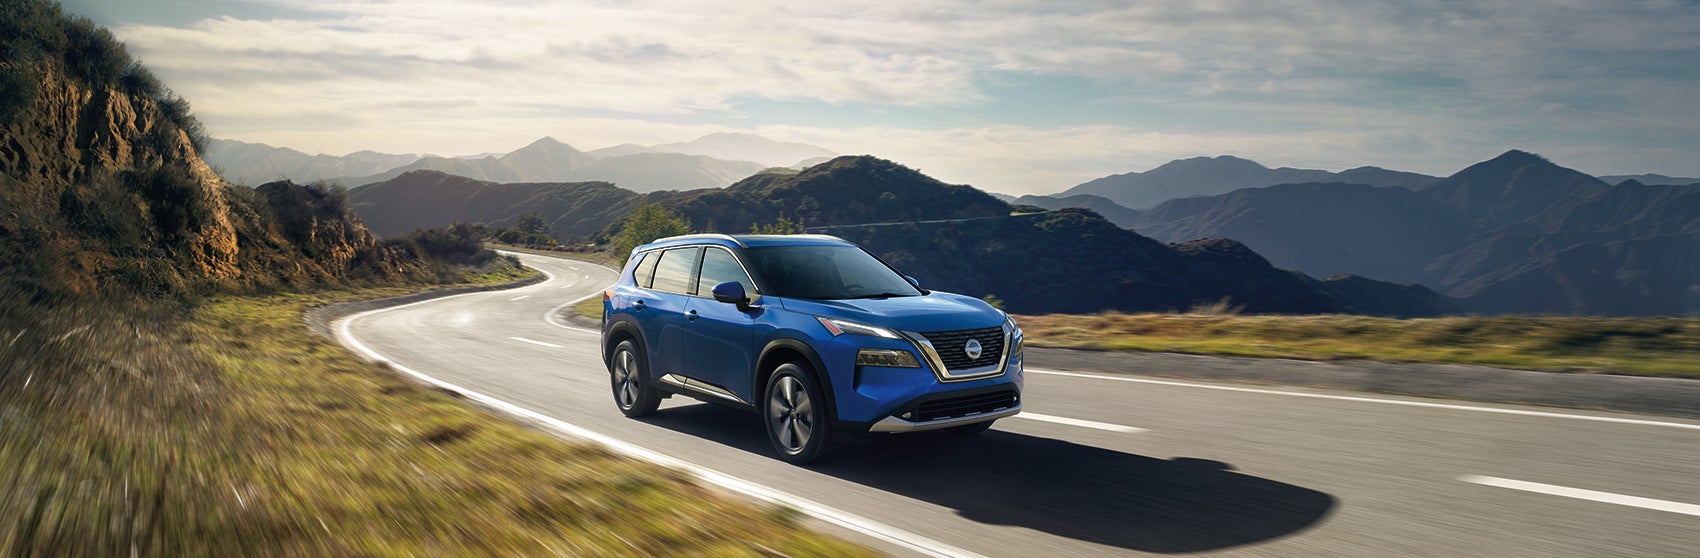 Nissan Rogue for sale near me Indianapolis, IN, 2021 nissan rogue